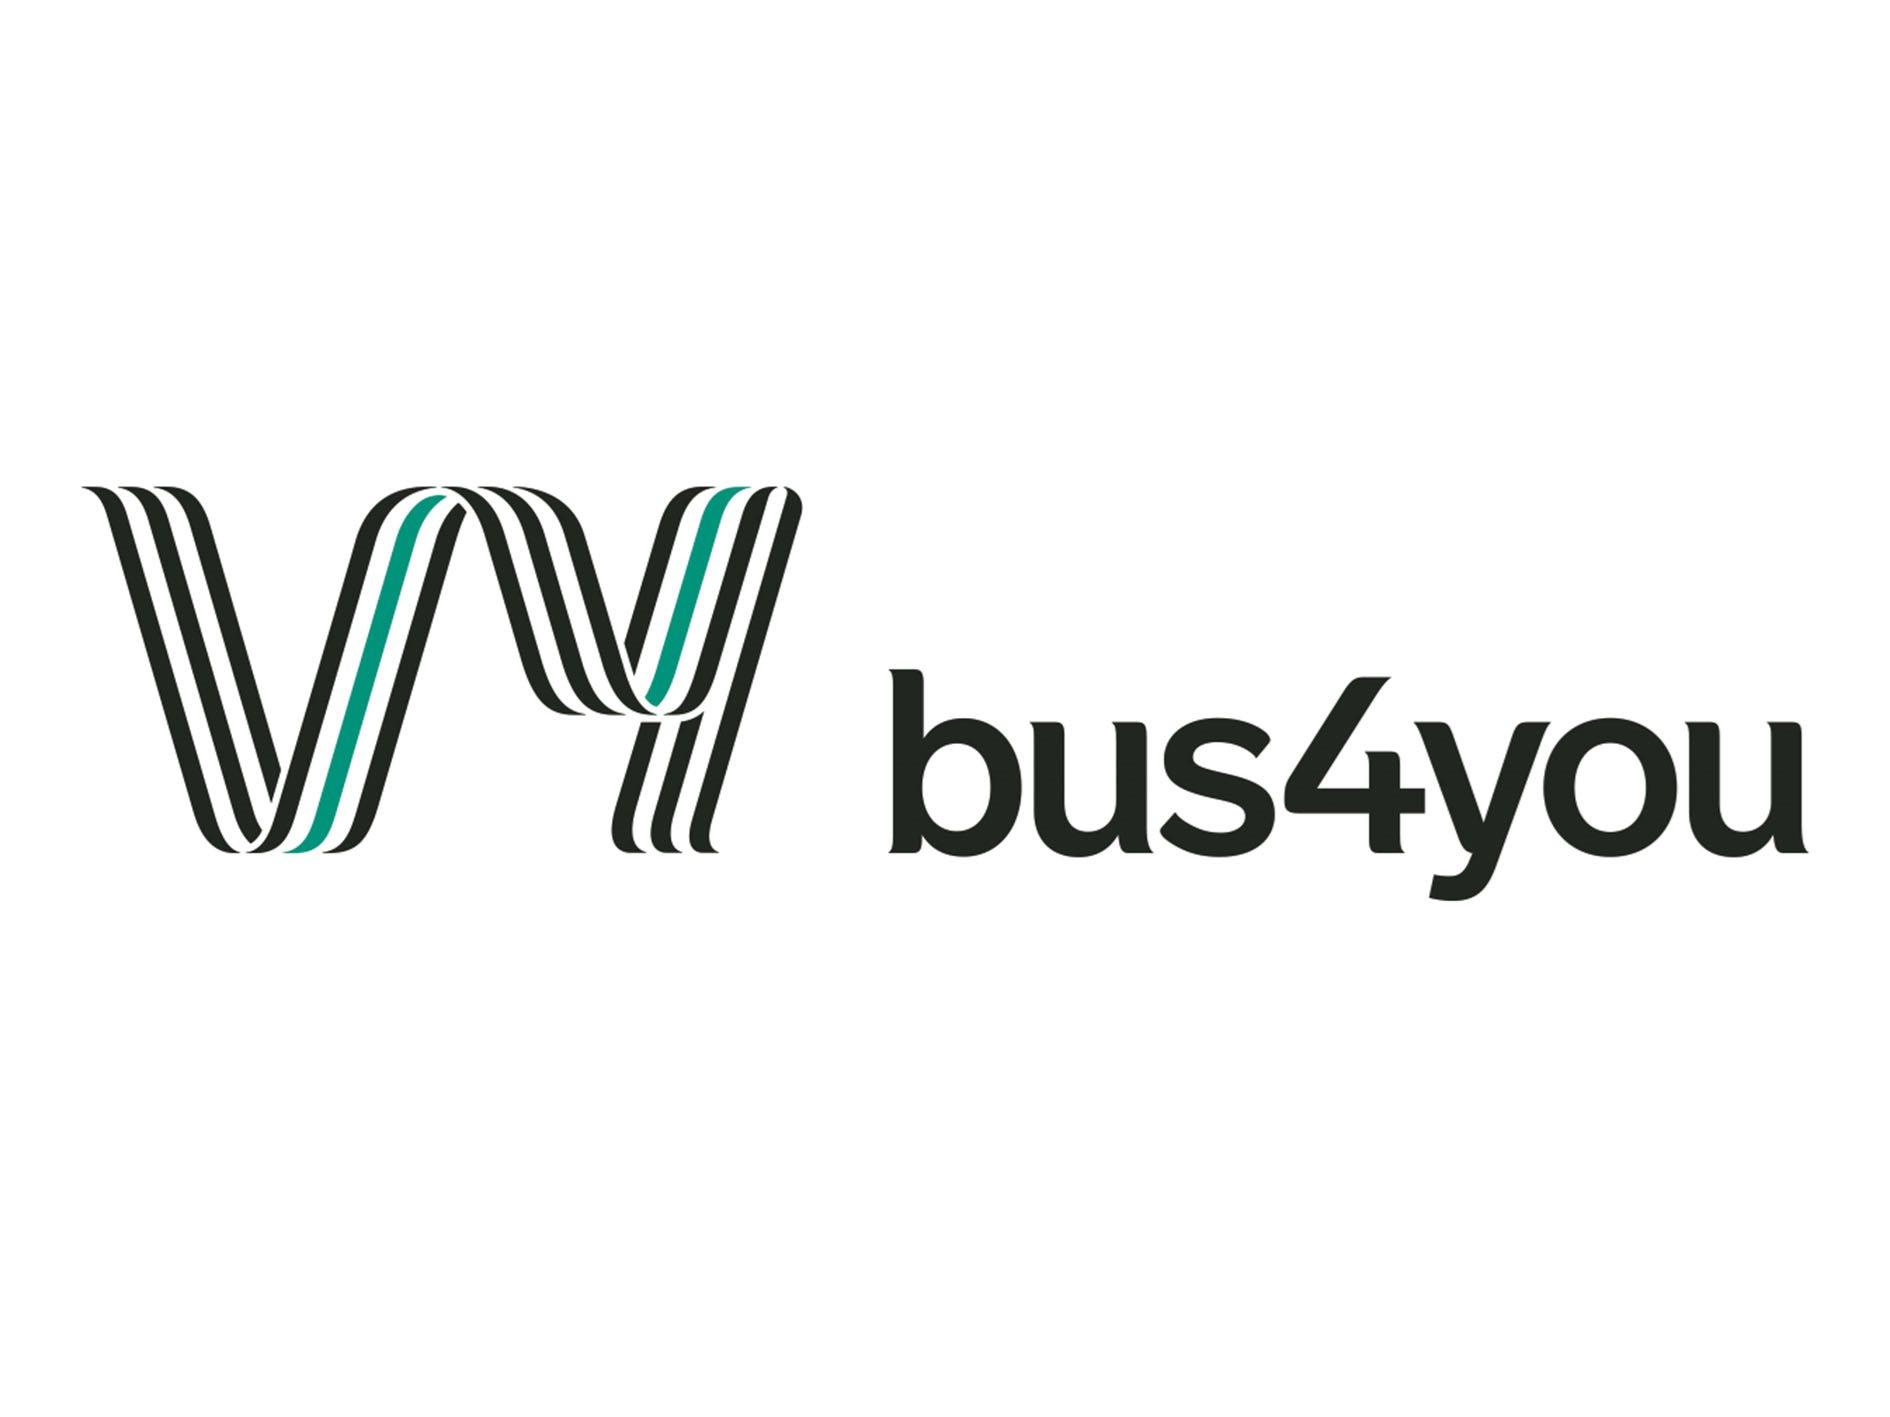 Vy Bus4you